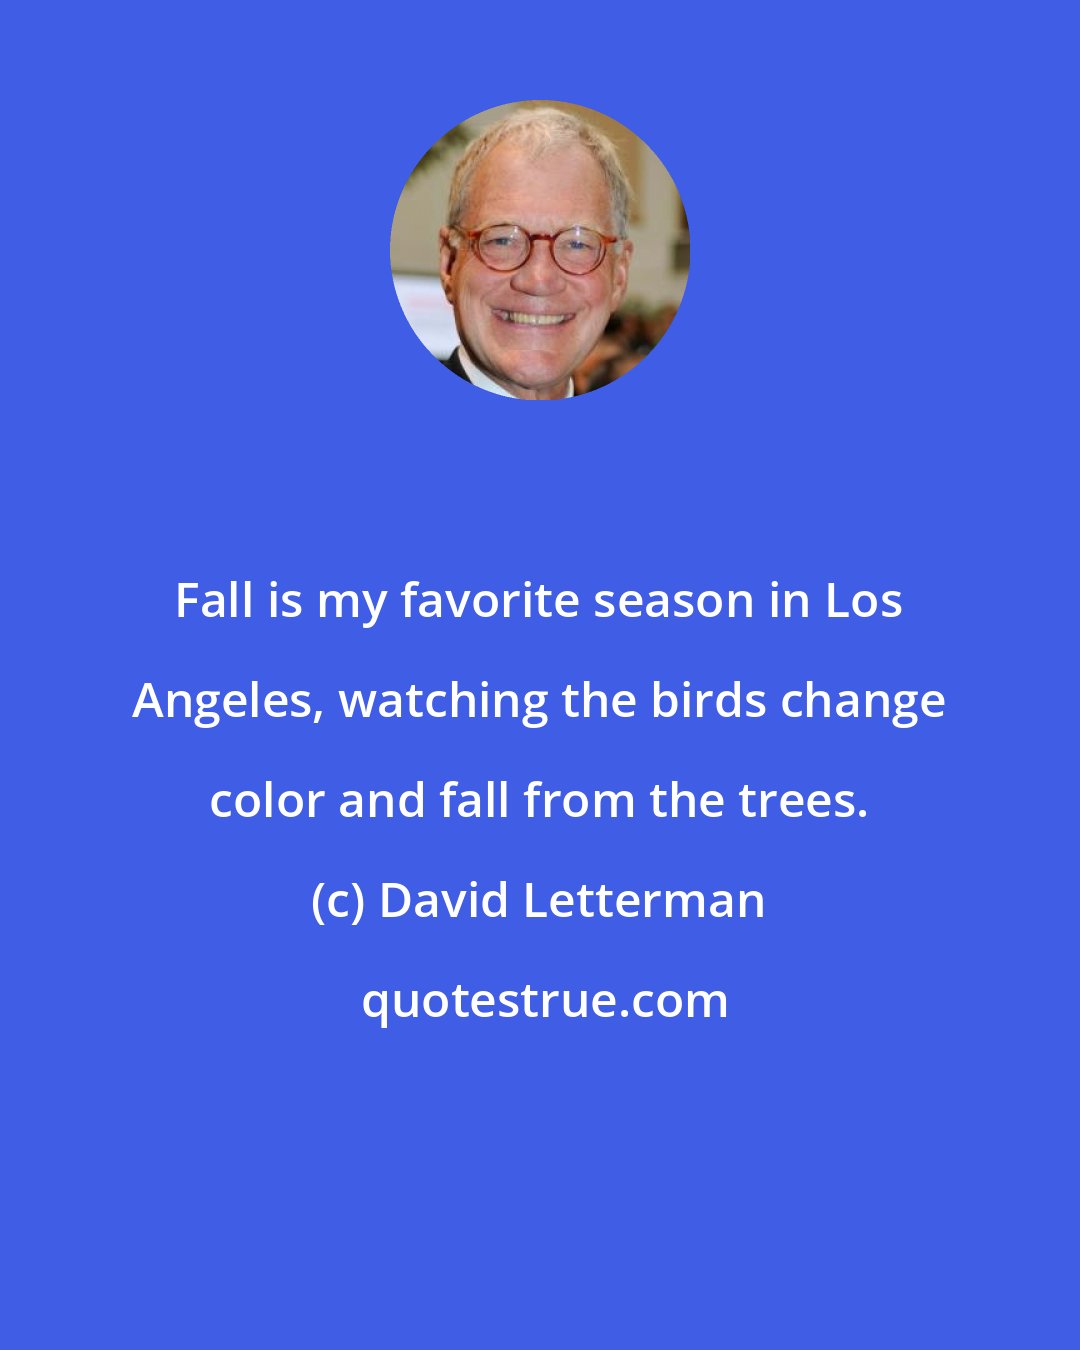 David Letterman: Fall is my favorite season in Los Angeles, watching the birds change color and fall from the trees.